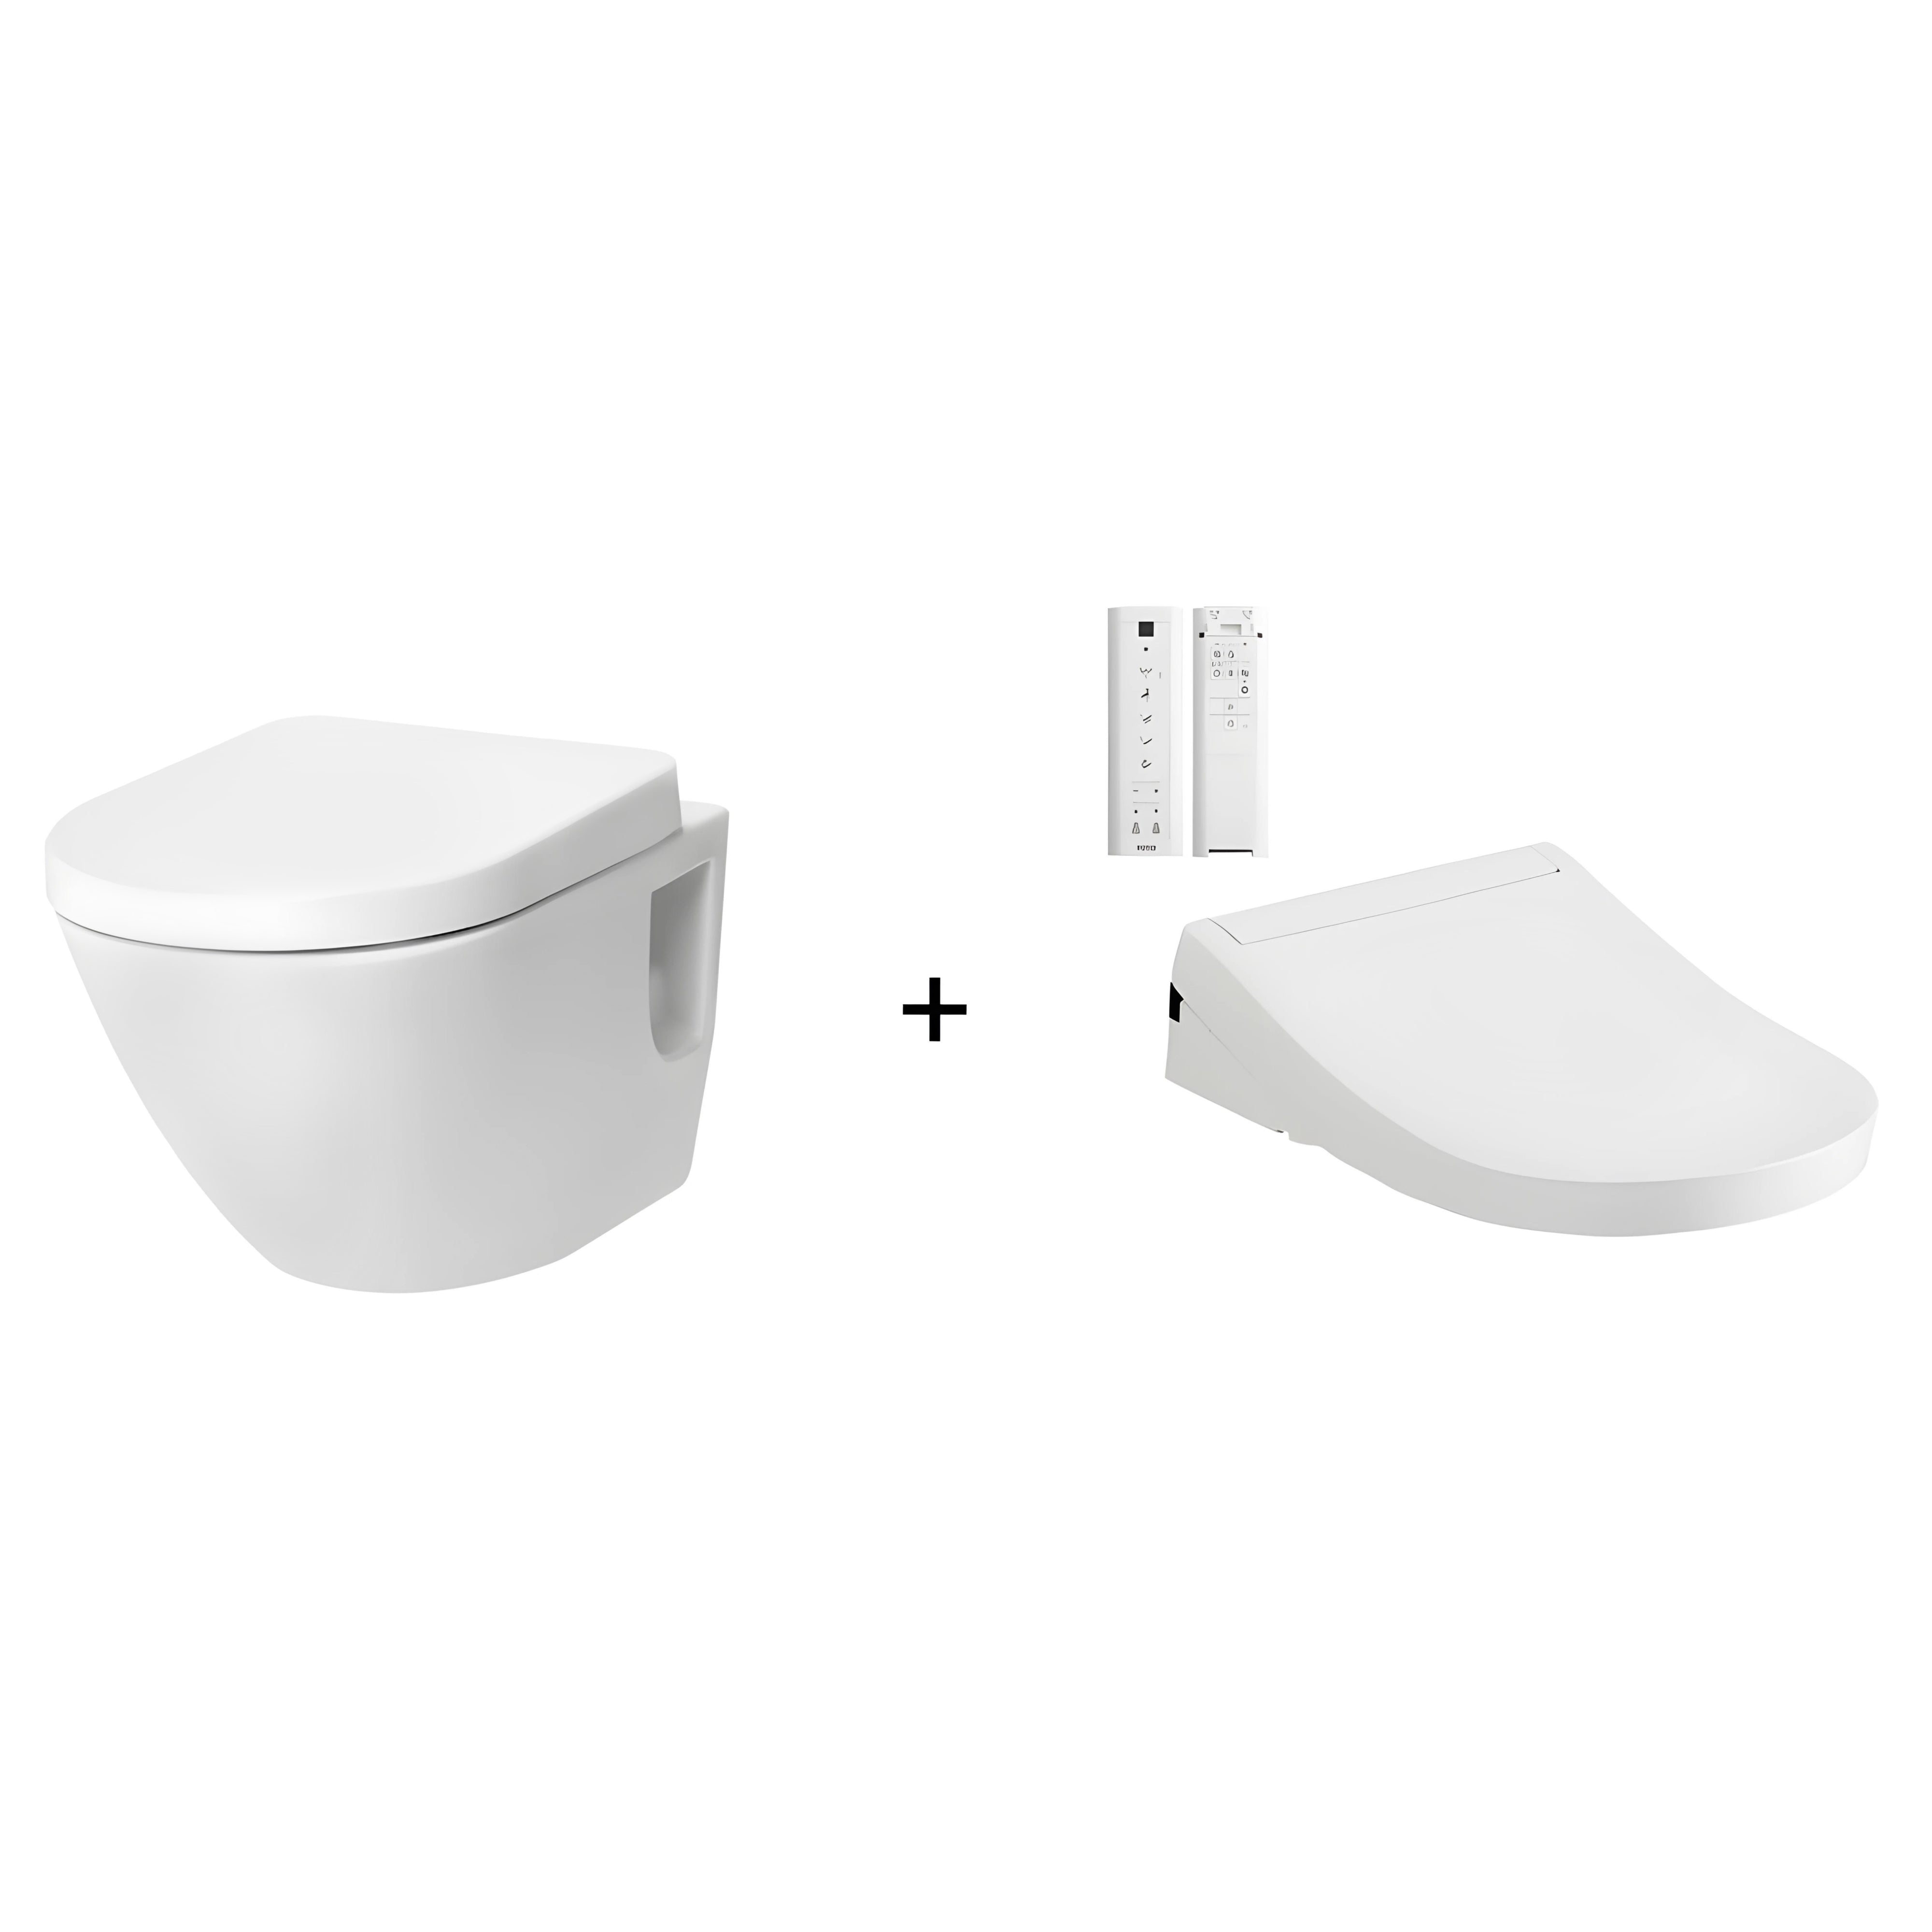 TOTO BASIC+ WALL HUNG TOILET AND S5 WASHLET W/ REMOTE CONTROL PACKAGE (D-SHAPED) GLOSS WHITE